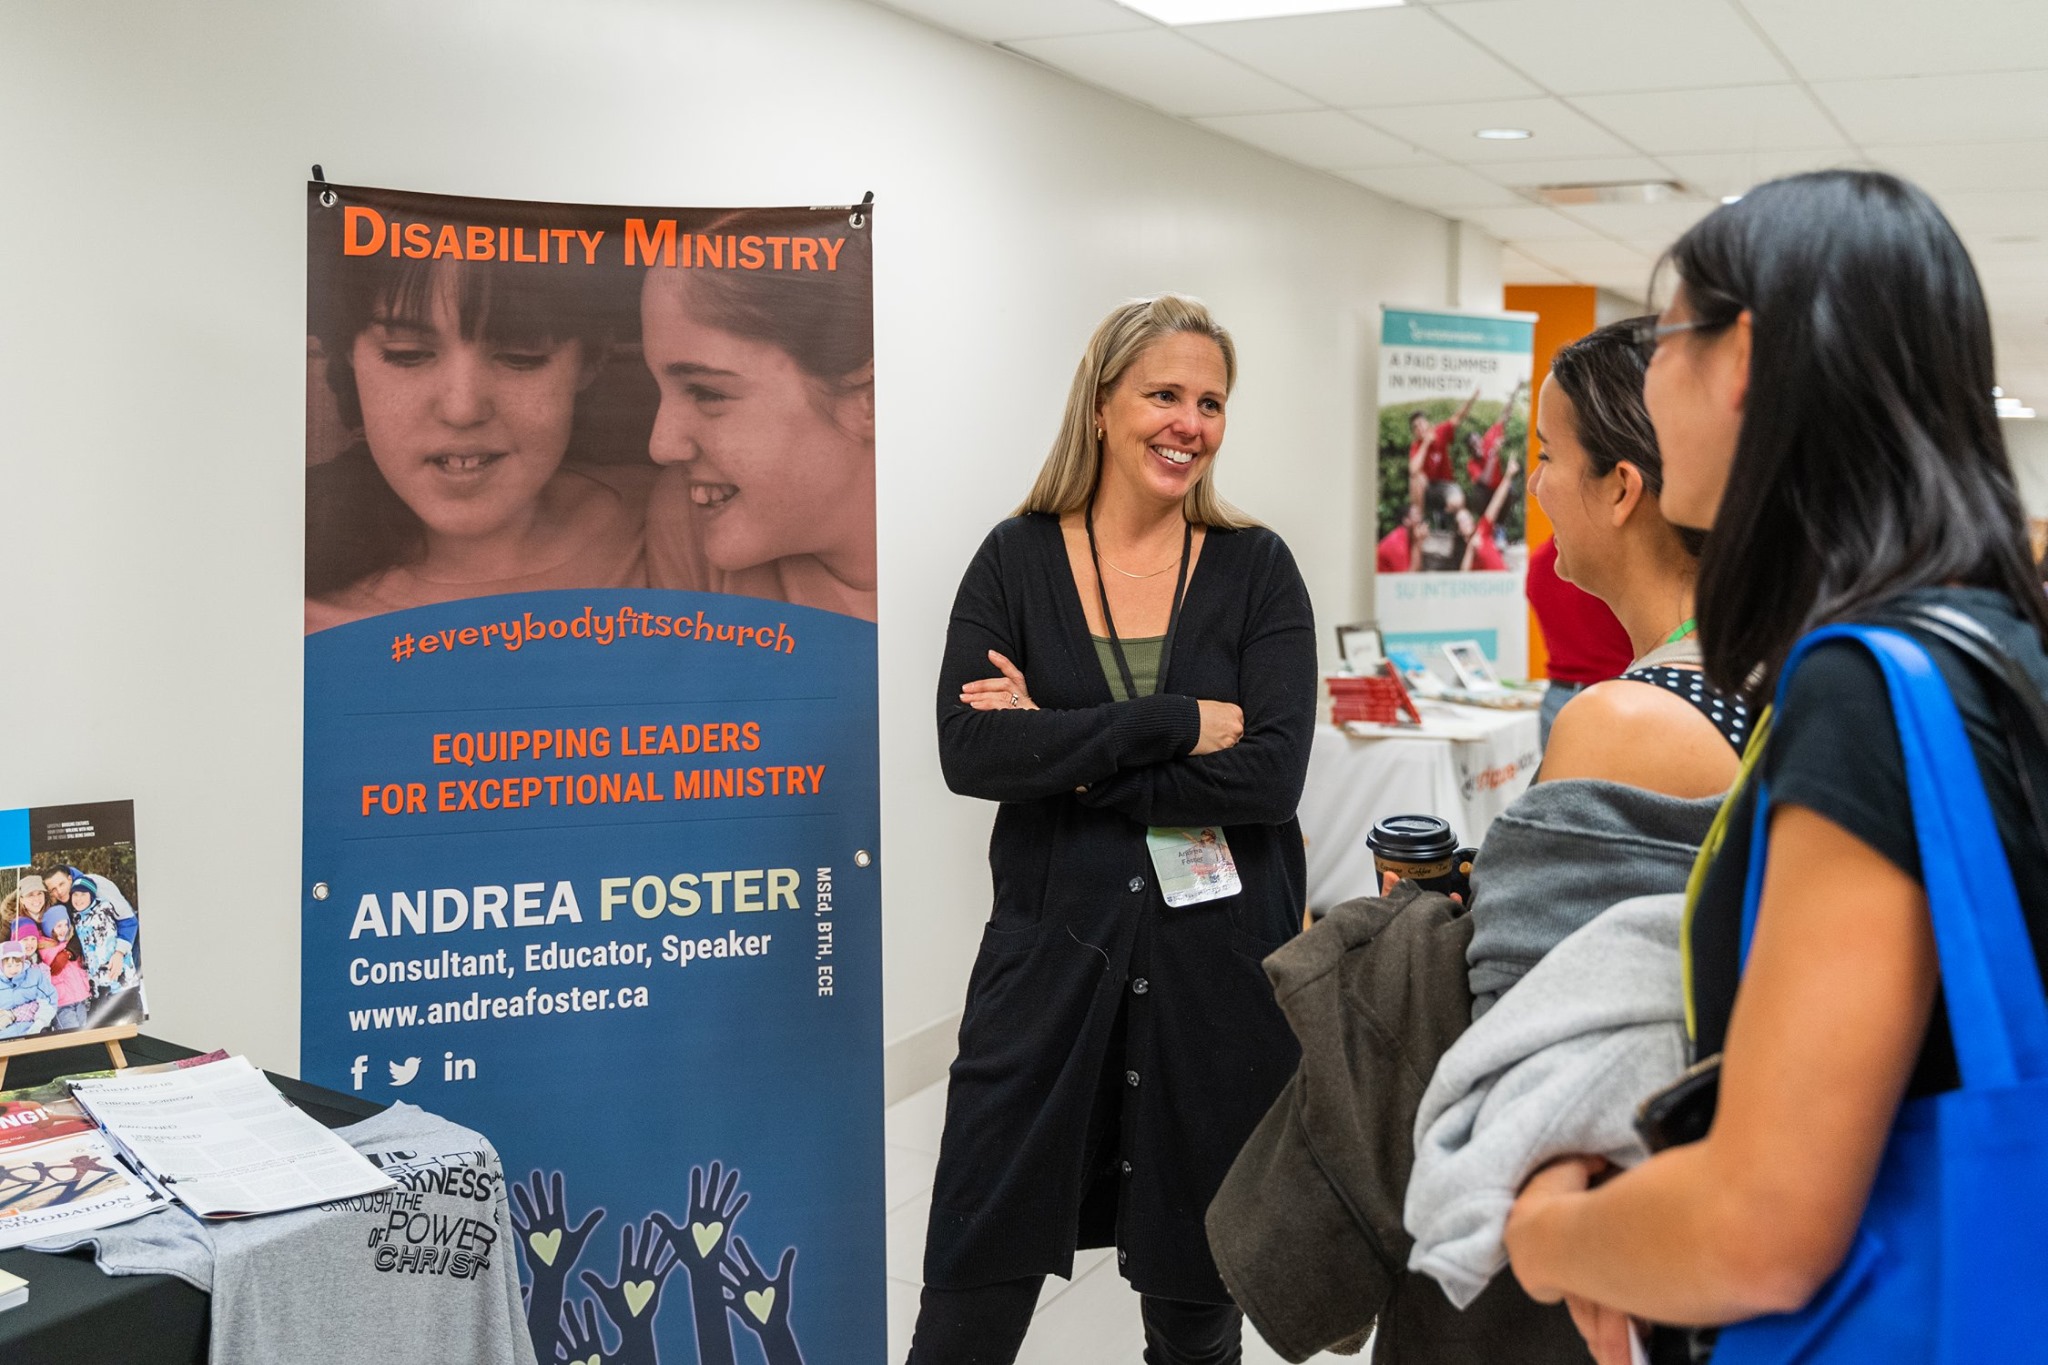 Andrea Foster talking with participants at the Disability ministry booth